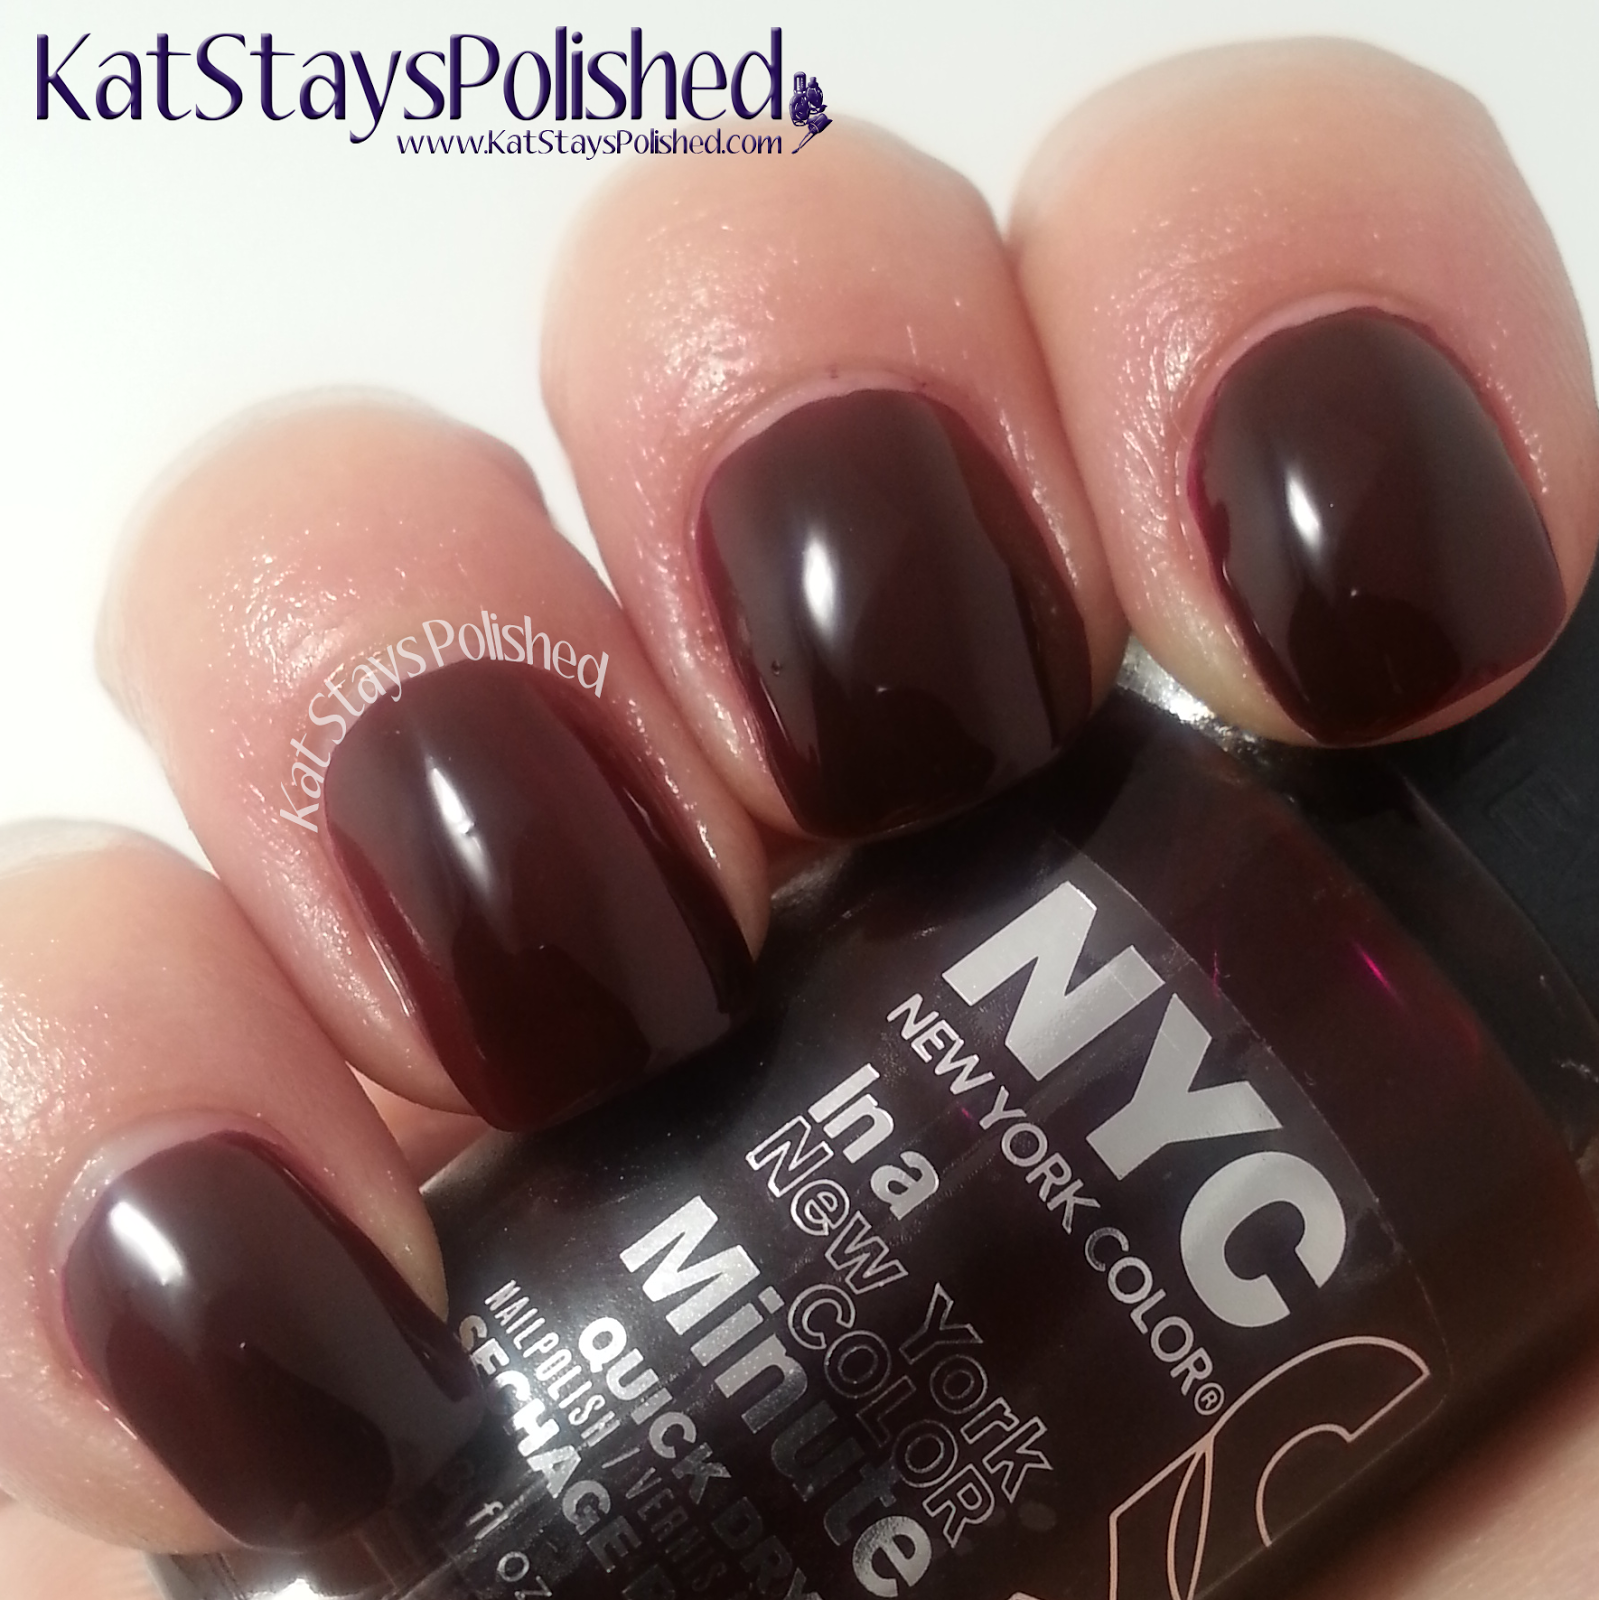 NYC New York Color - Midnight Beauty Collection - I Am Not AffRED | Kat Stays Polished